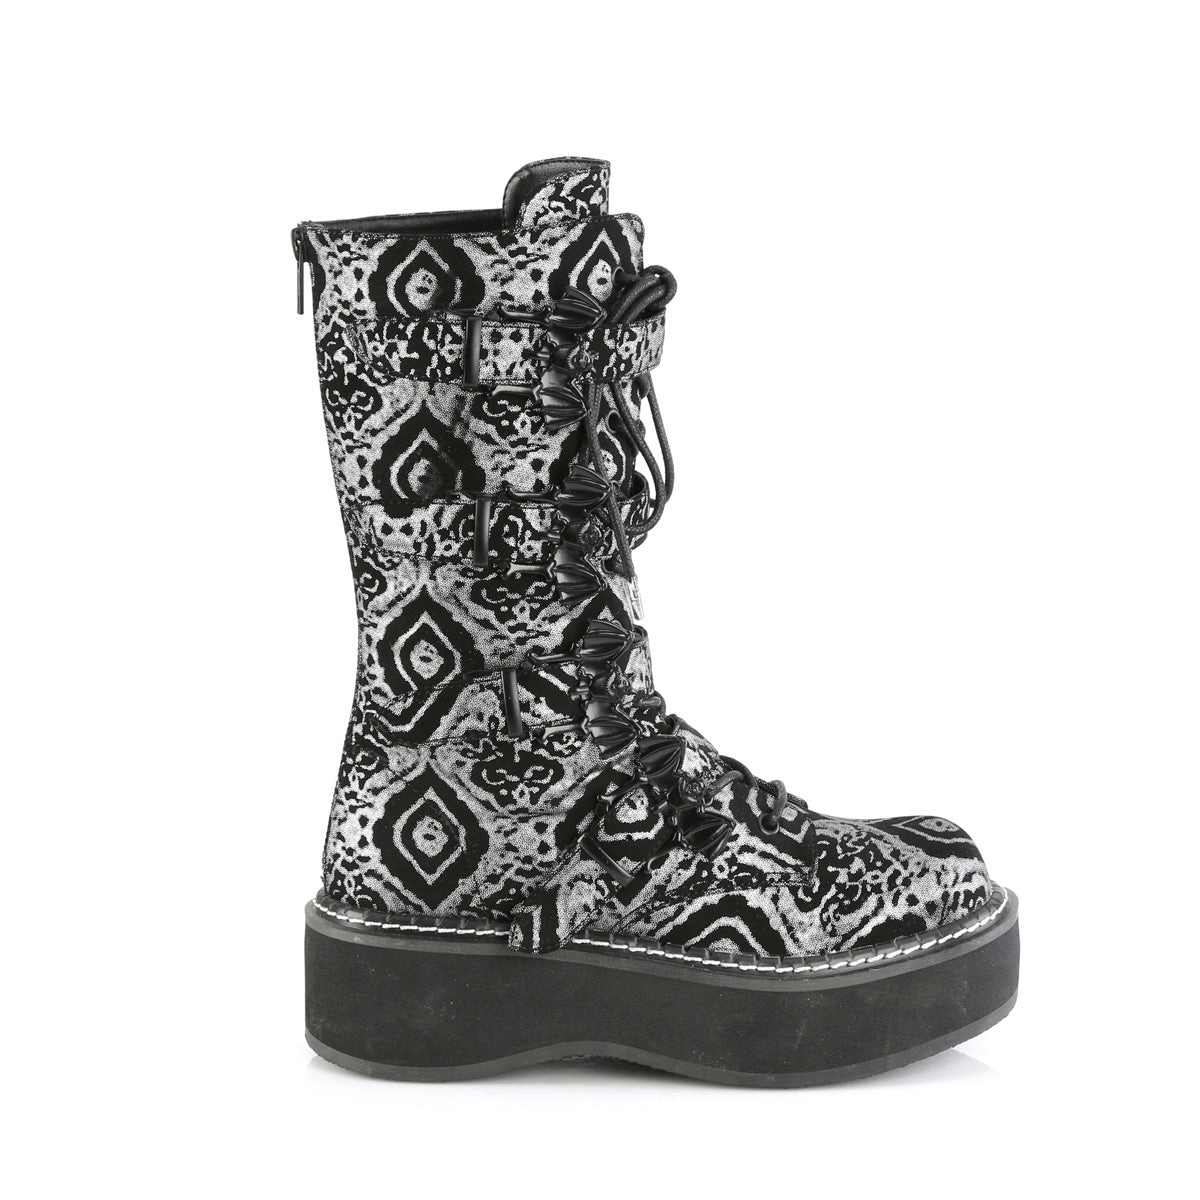 DEMONIA Gothic Mid-Calf Boots with Bat Buckle Straps